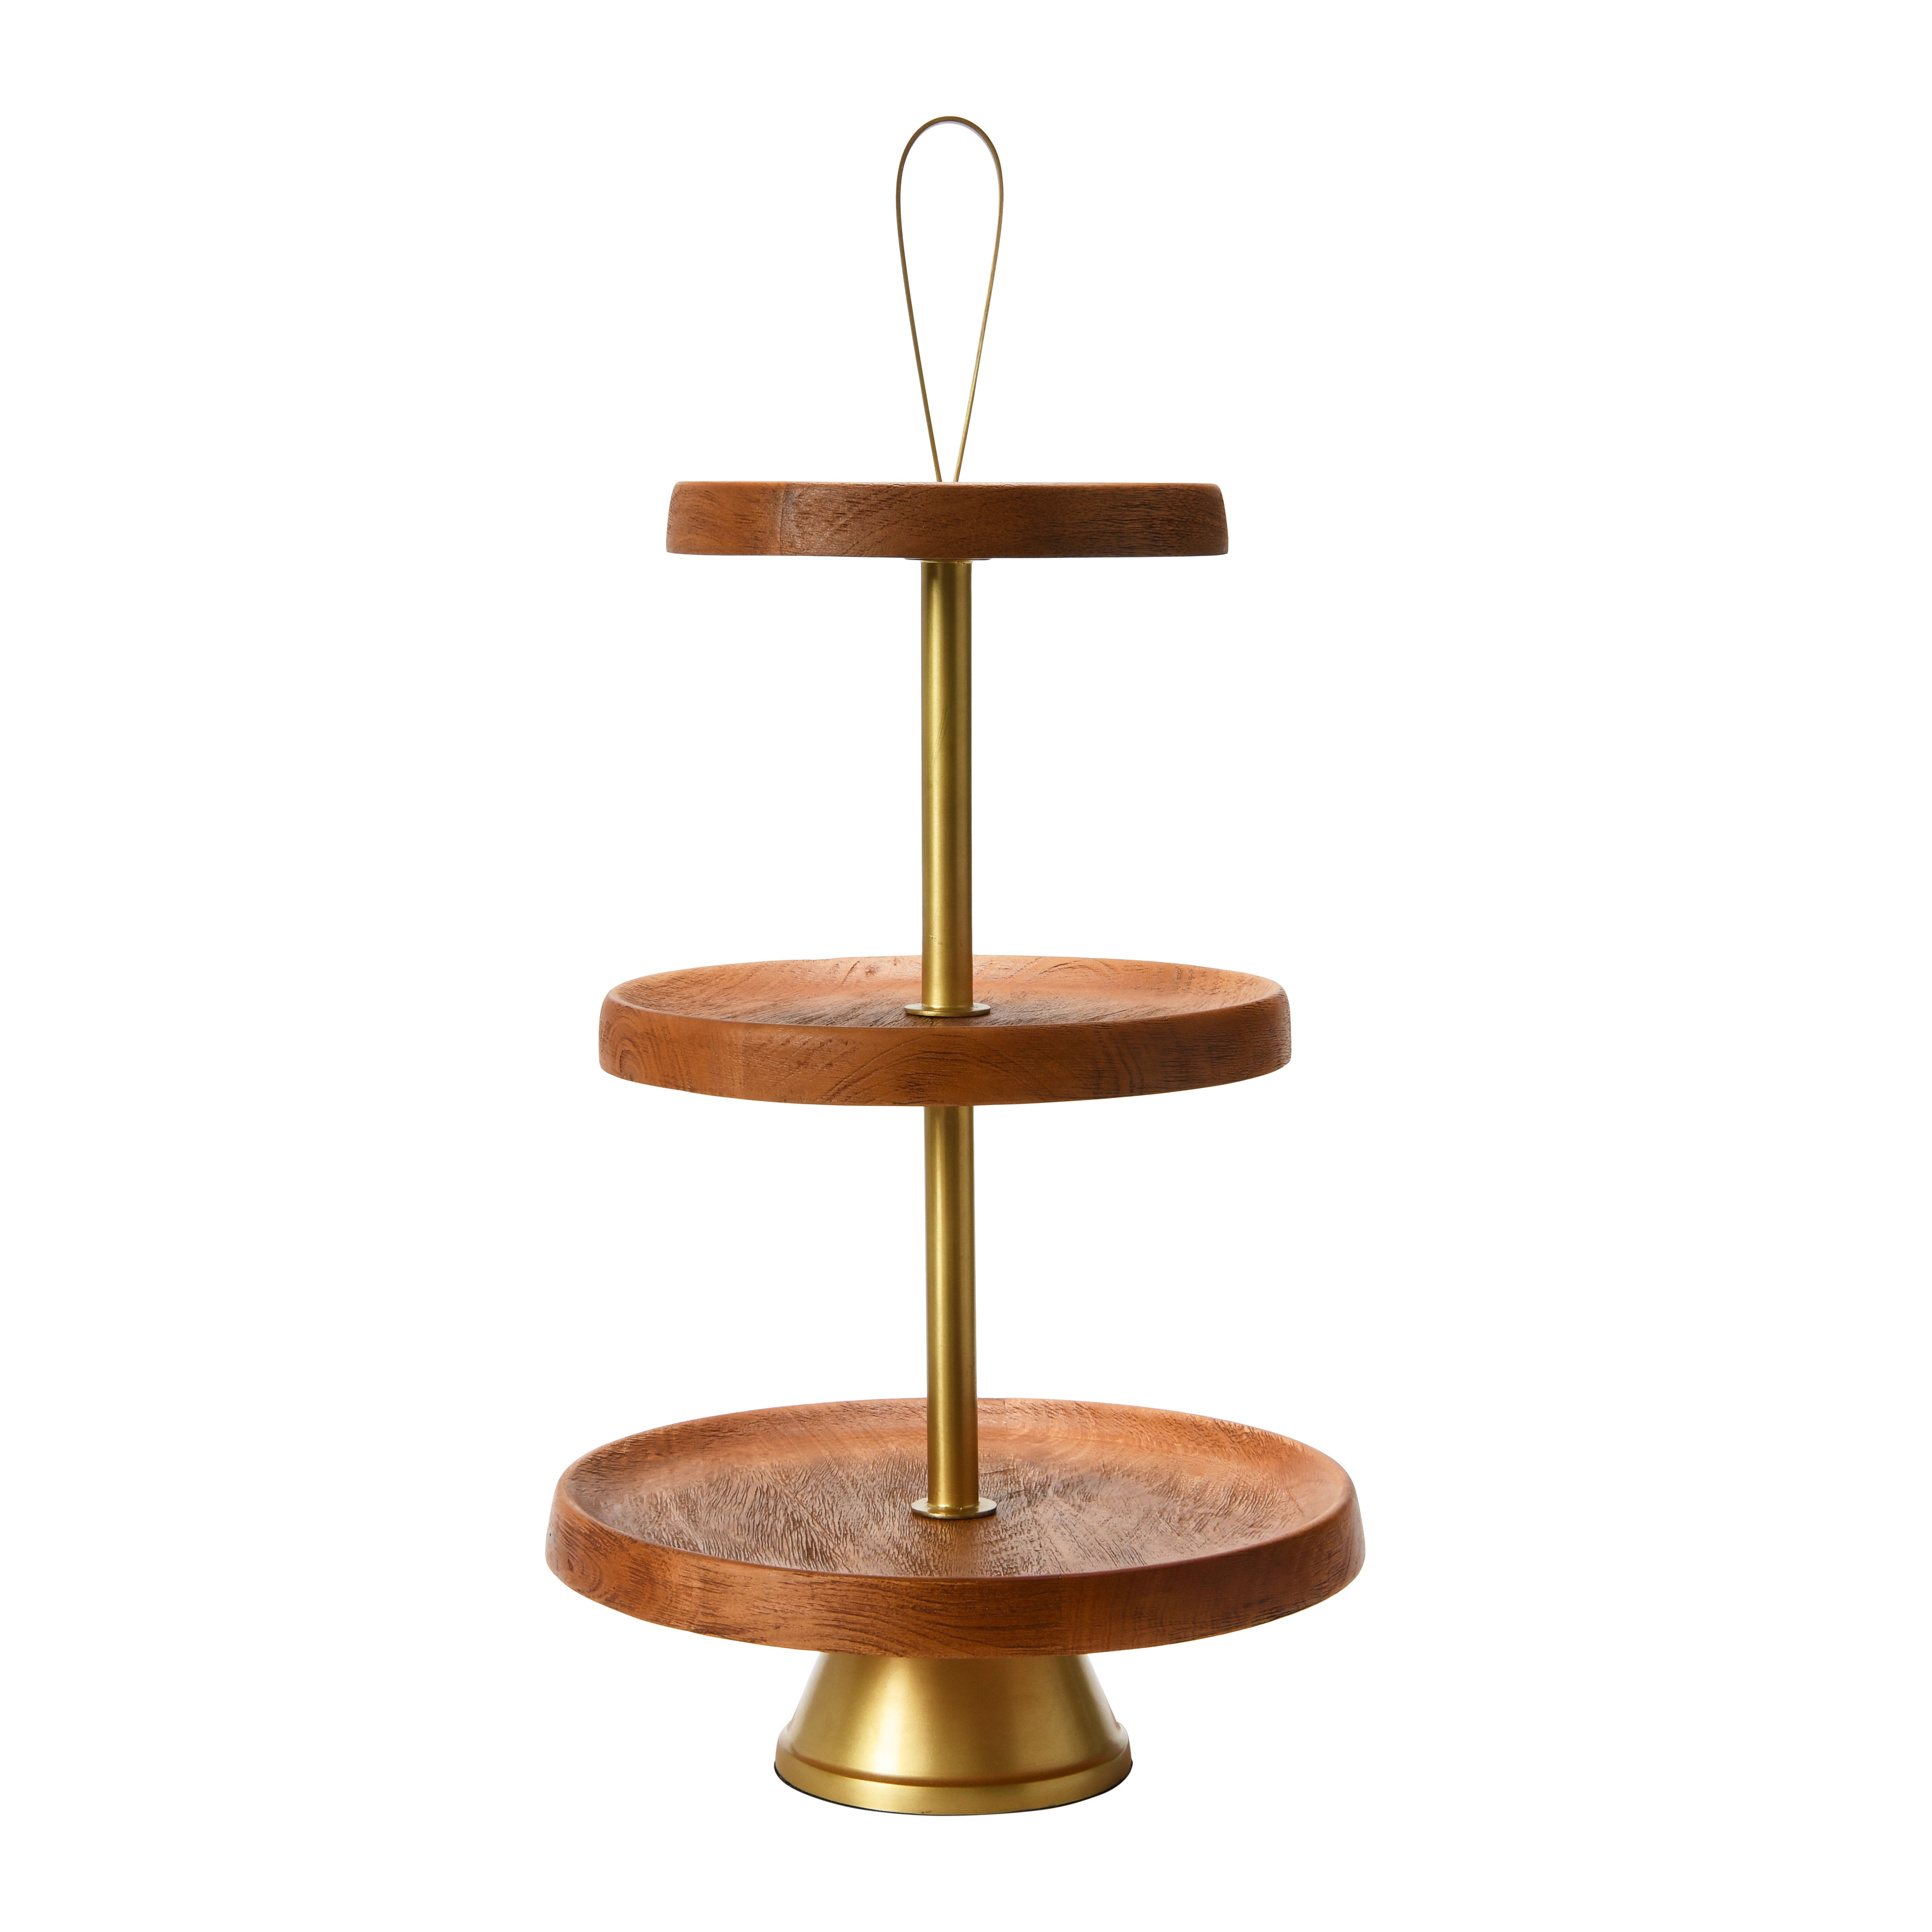 Elegant Modern 3-Tiered Tray, Cake Stand or Desert Serve ware Tower, Natural & Gold - Image 0